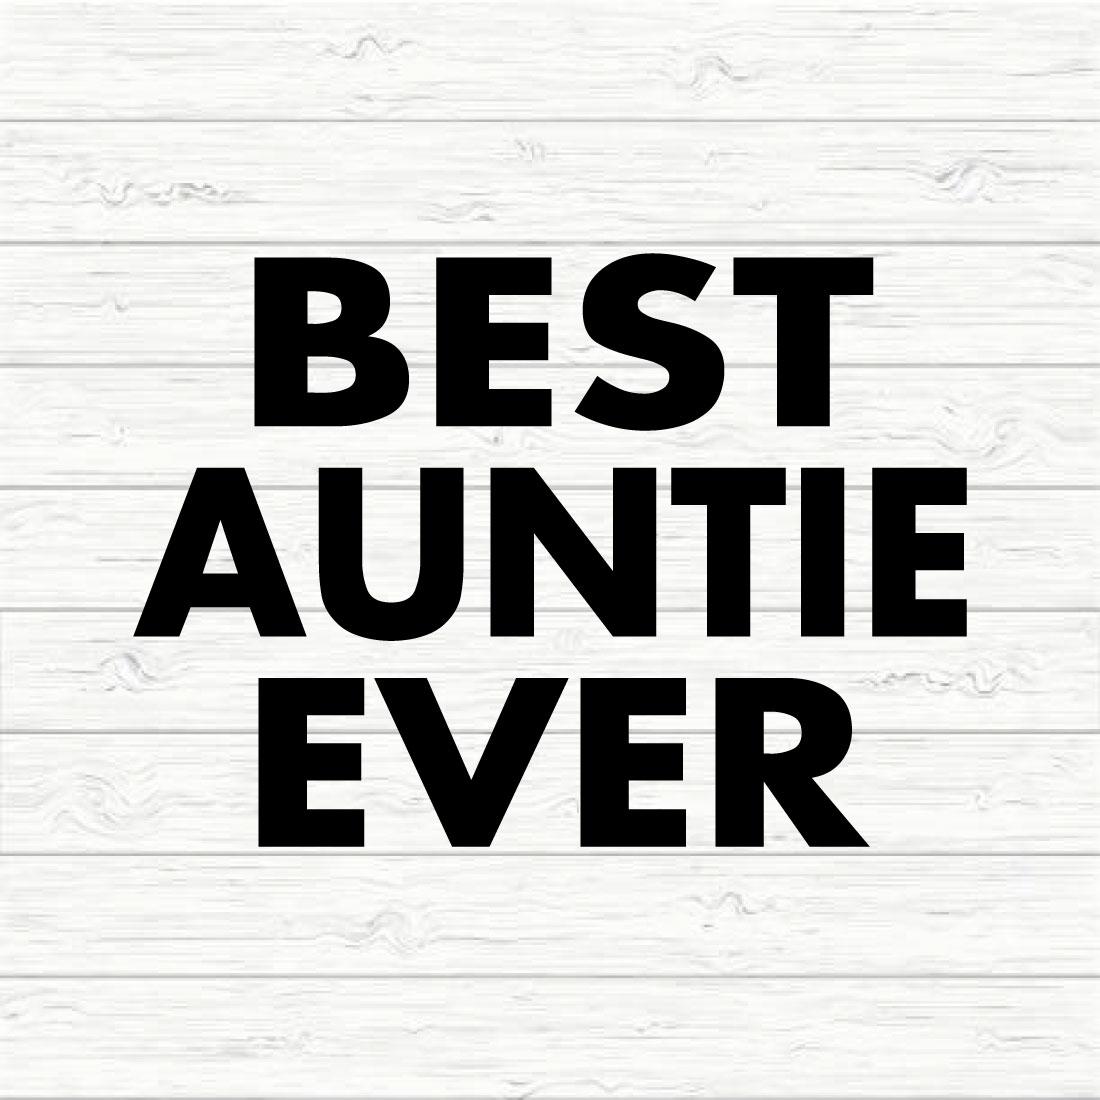 Best auntie ever preview image.